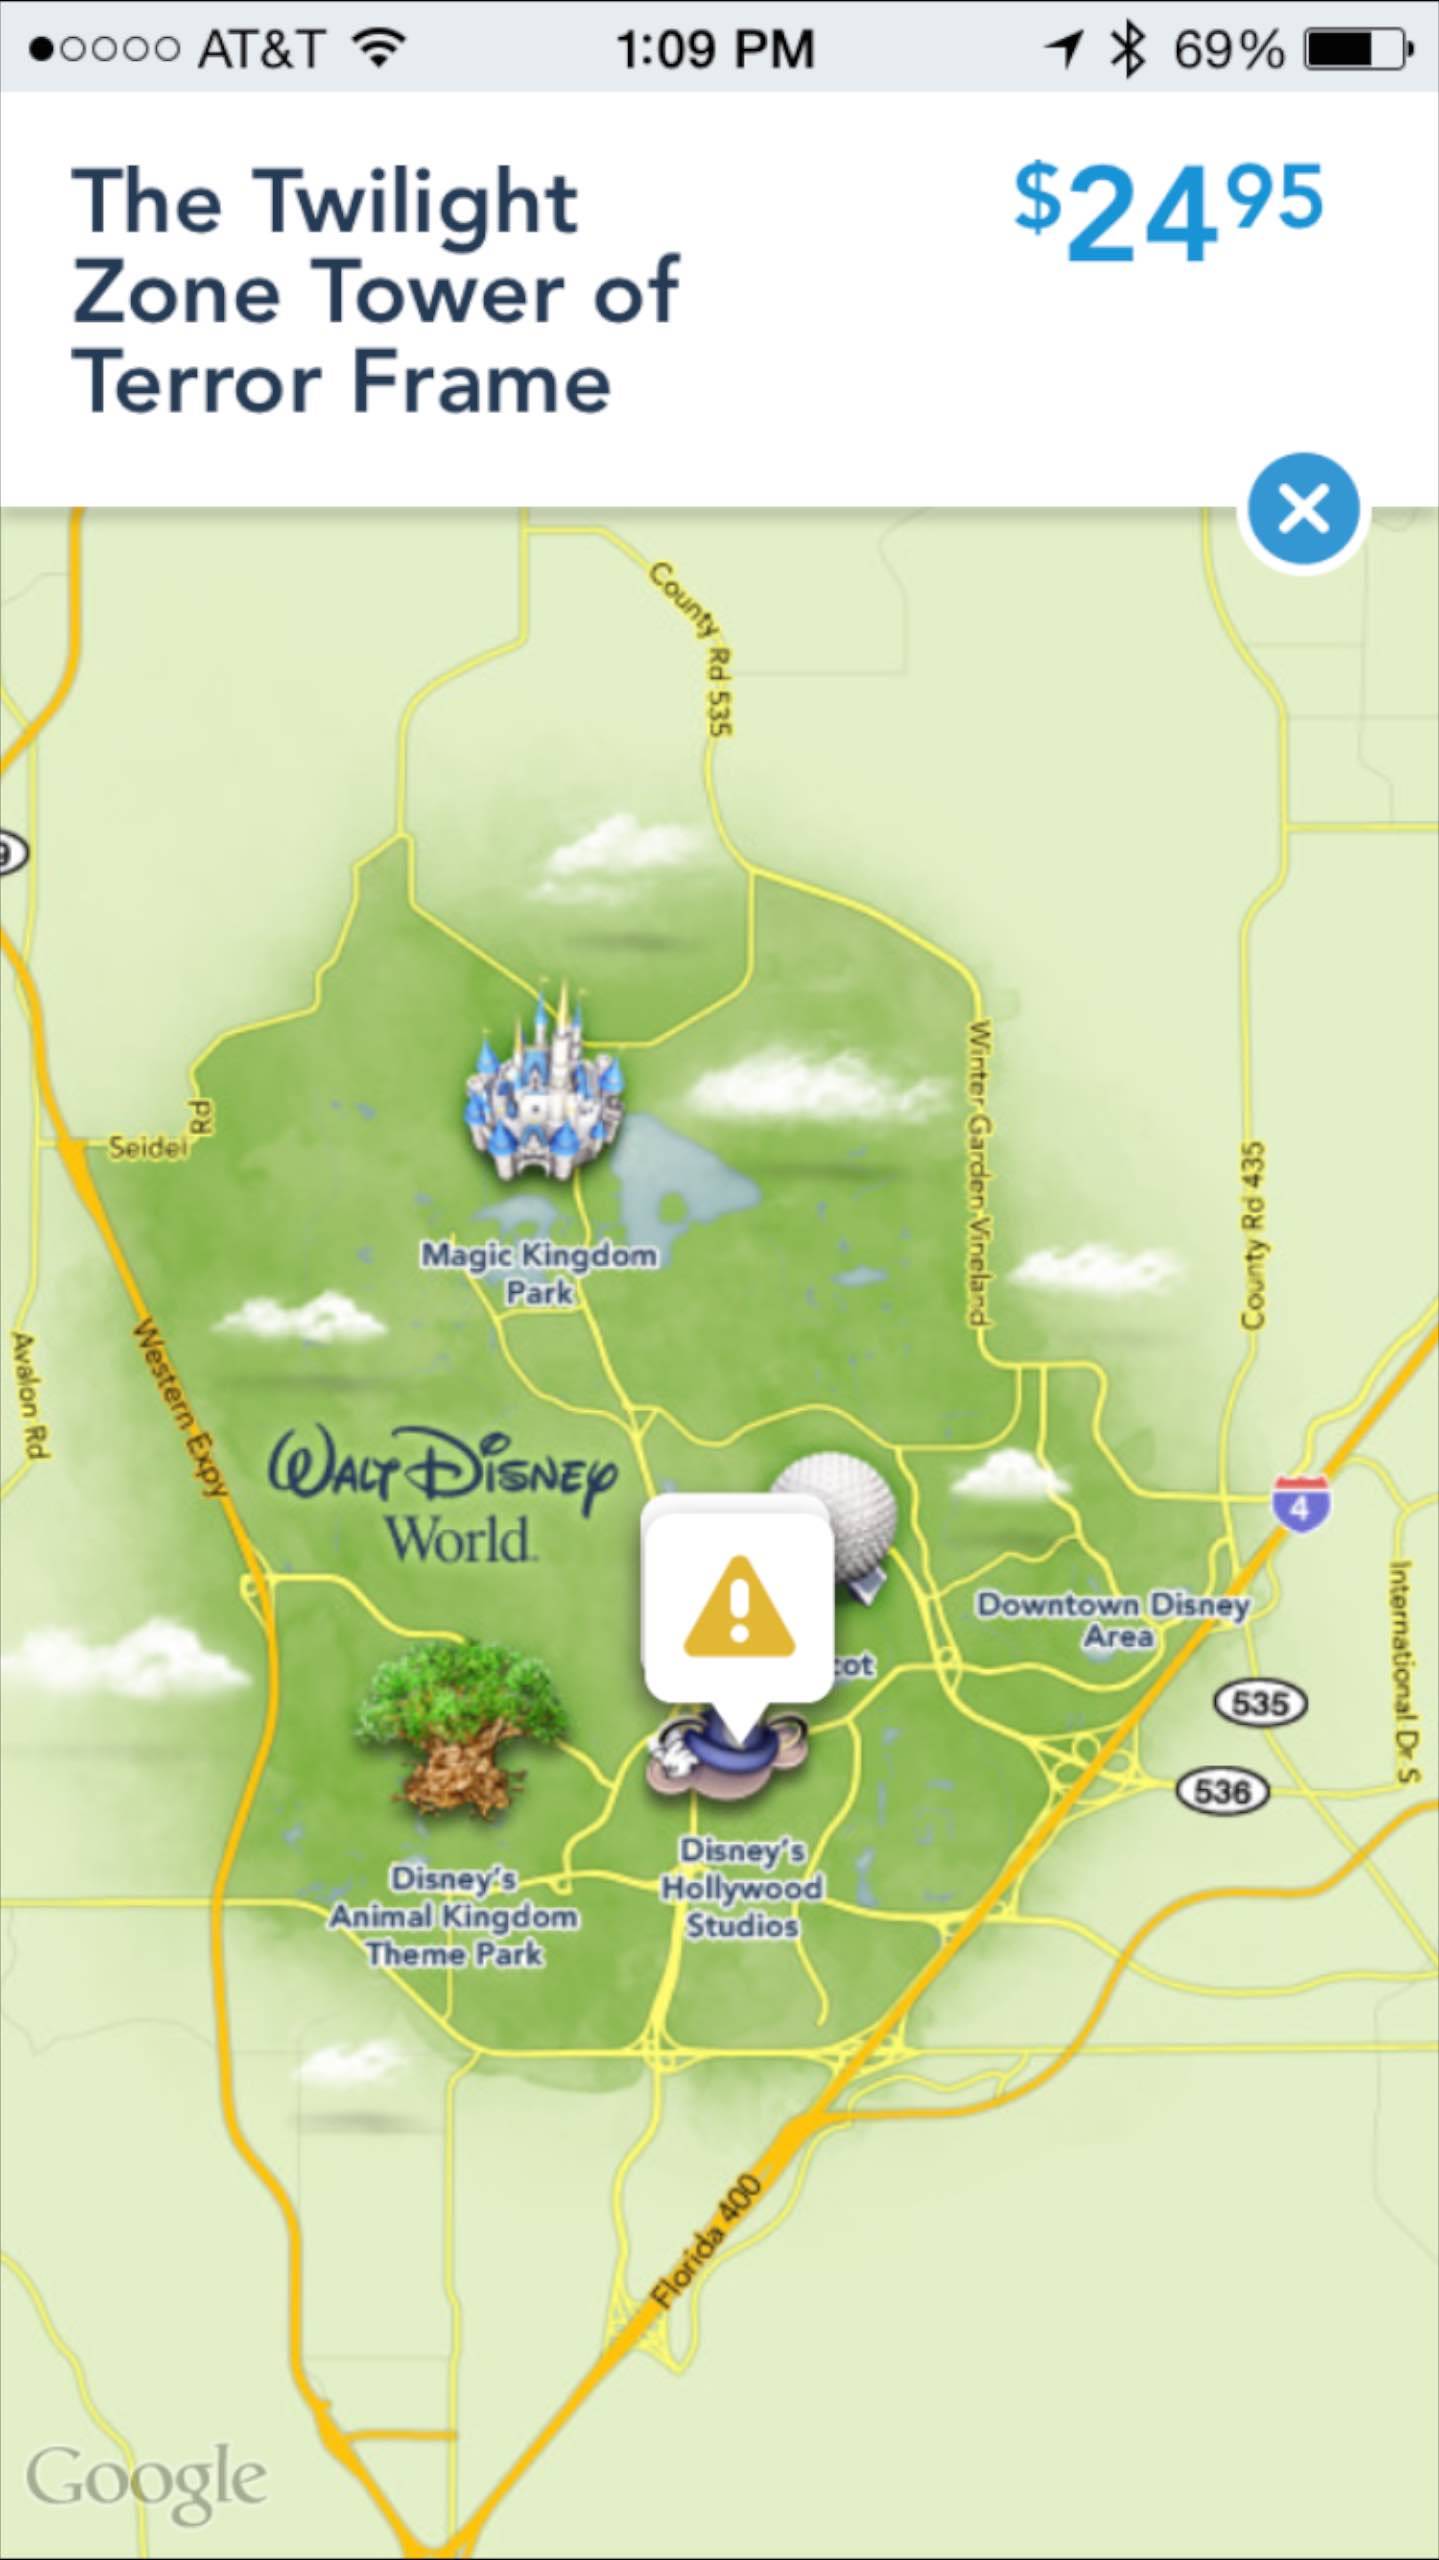 New 'Shop Disney Parks' app now available in the App Store